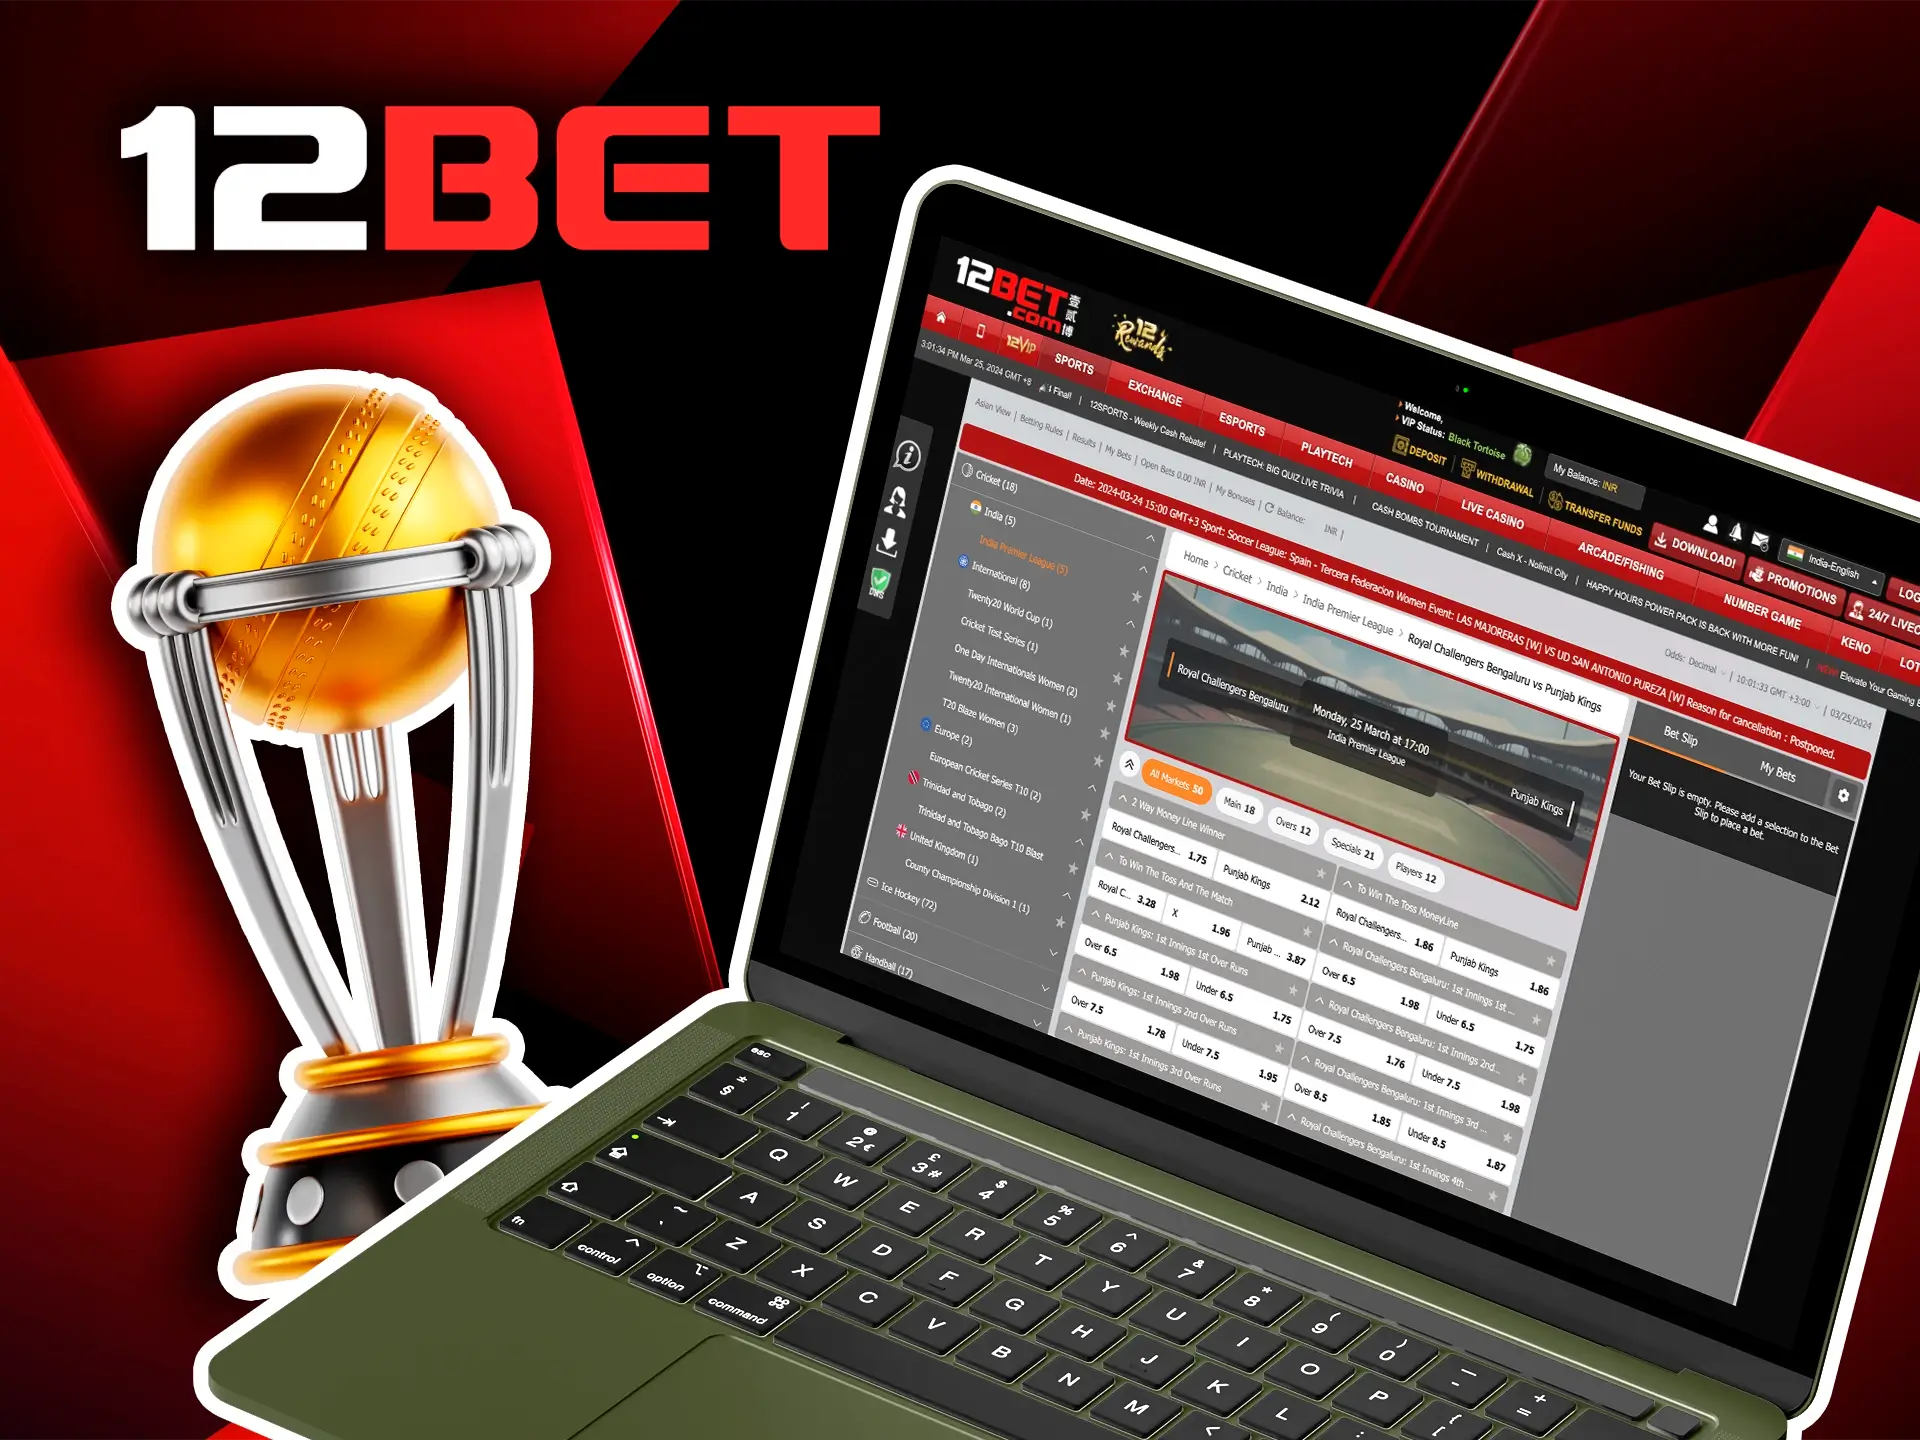 All the most famous tournaments are collected at 12Bet and are waiting for your accurate predictions on world cricket events.